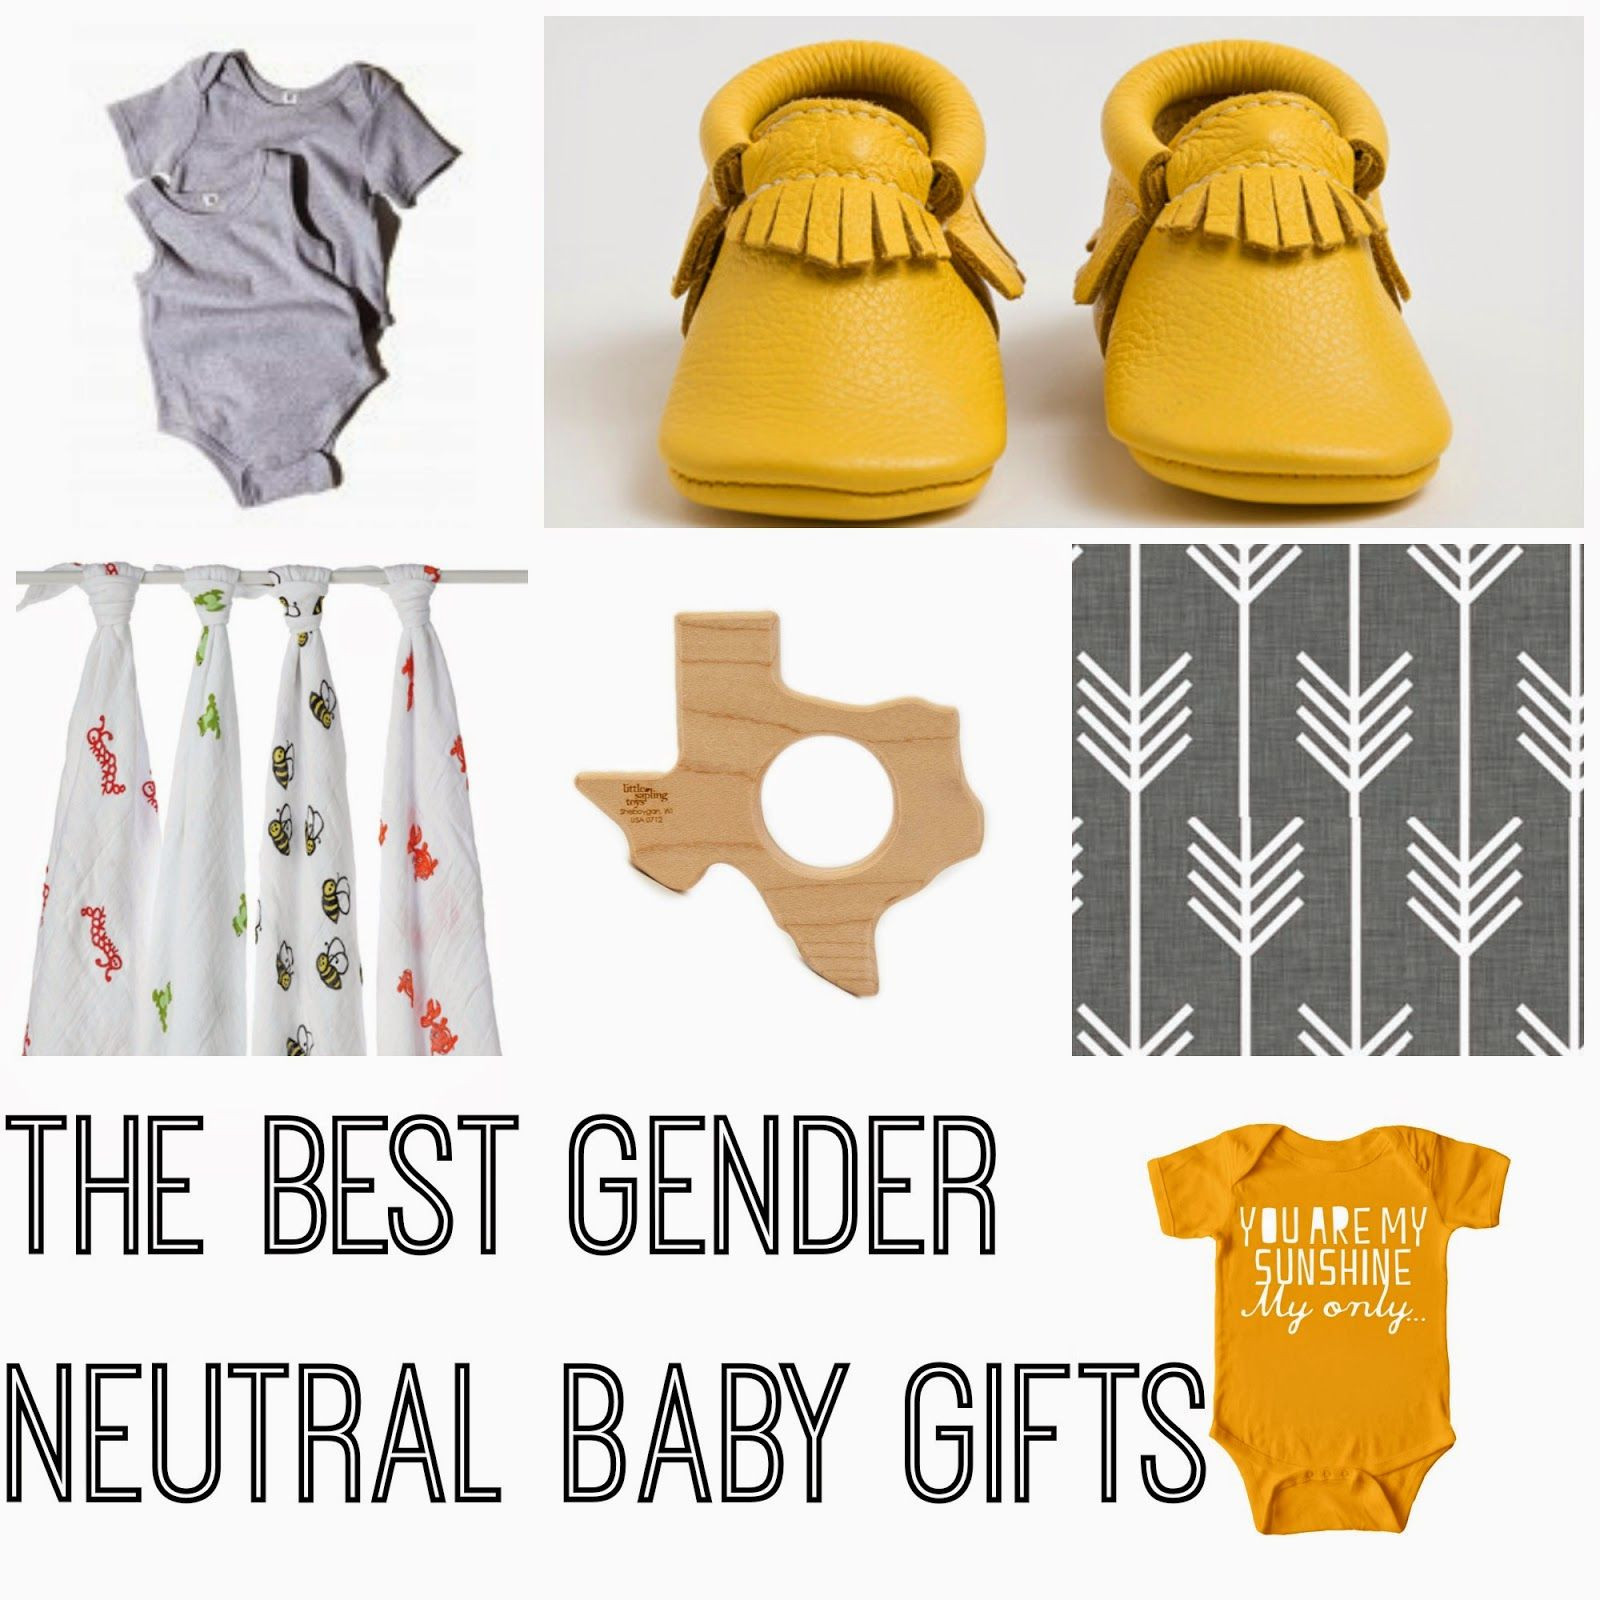 Neutral Baby Gift Ideas
 The Best Gender Neutral Baby Gifts & Giveaway